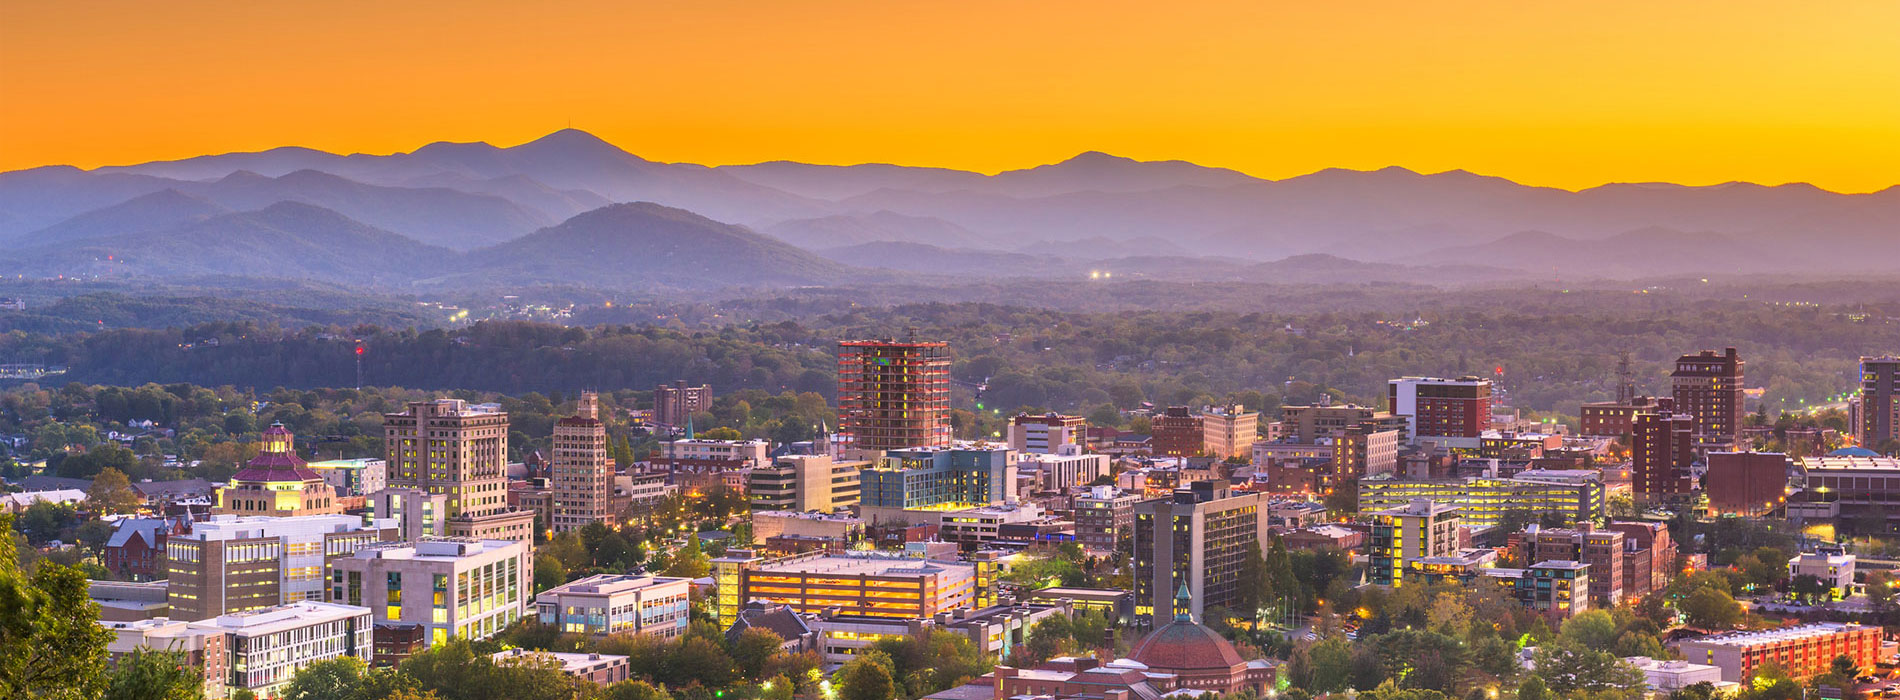 Asheville NC downtown aerial